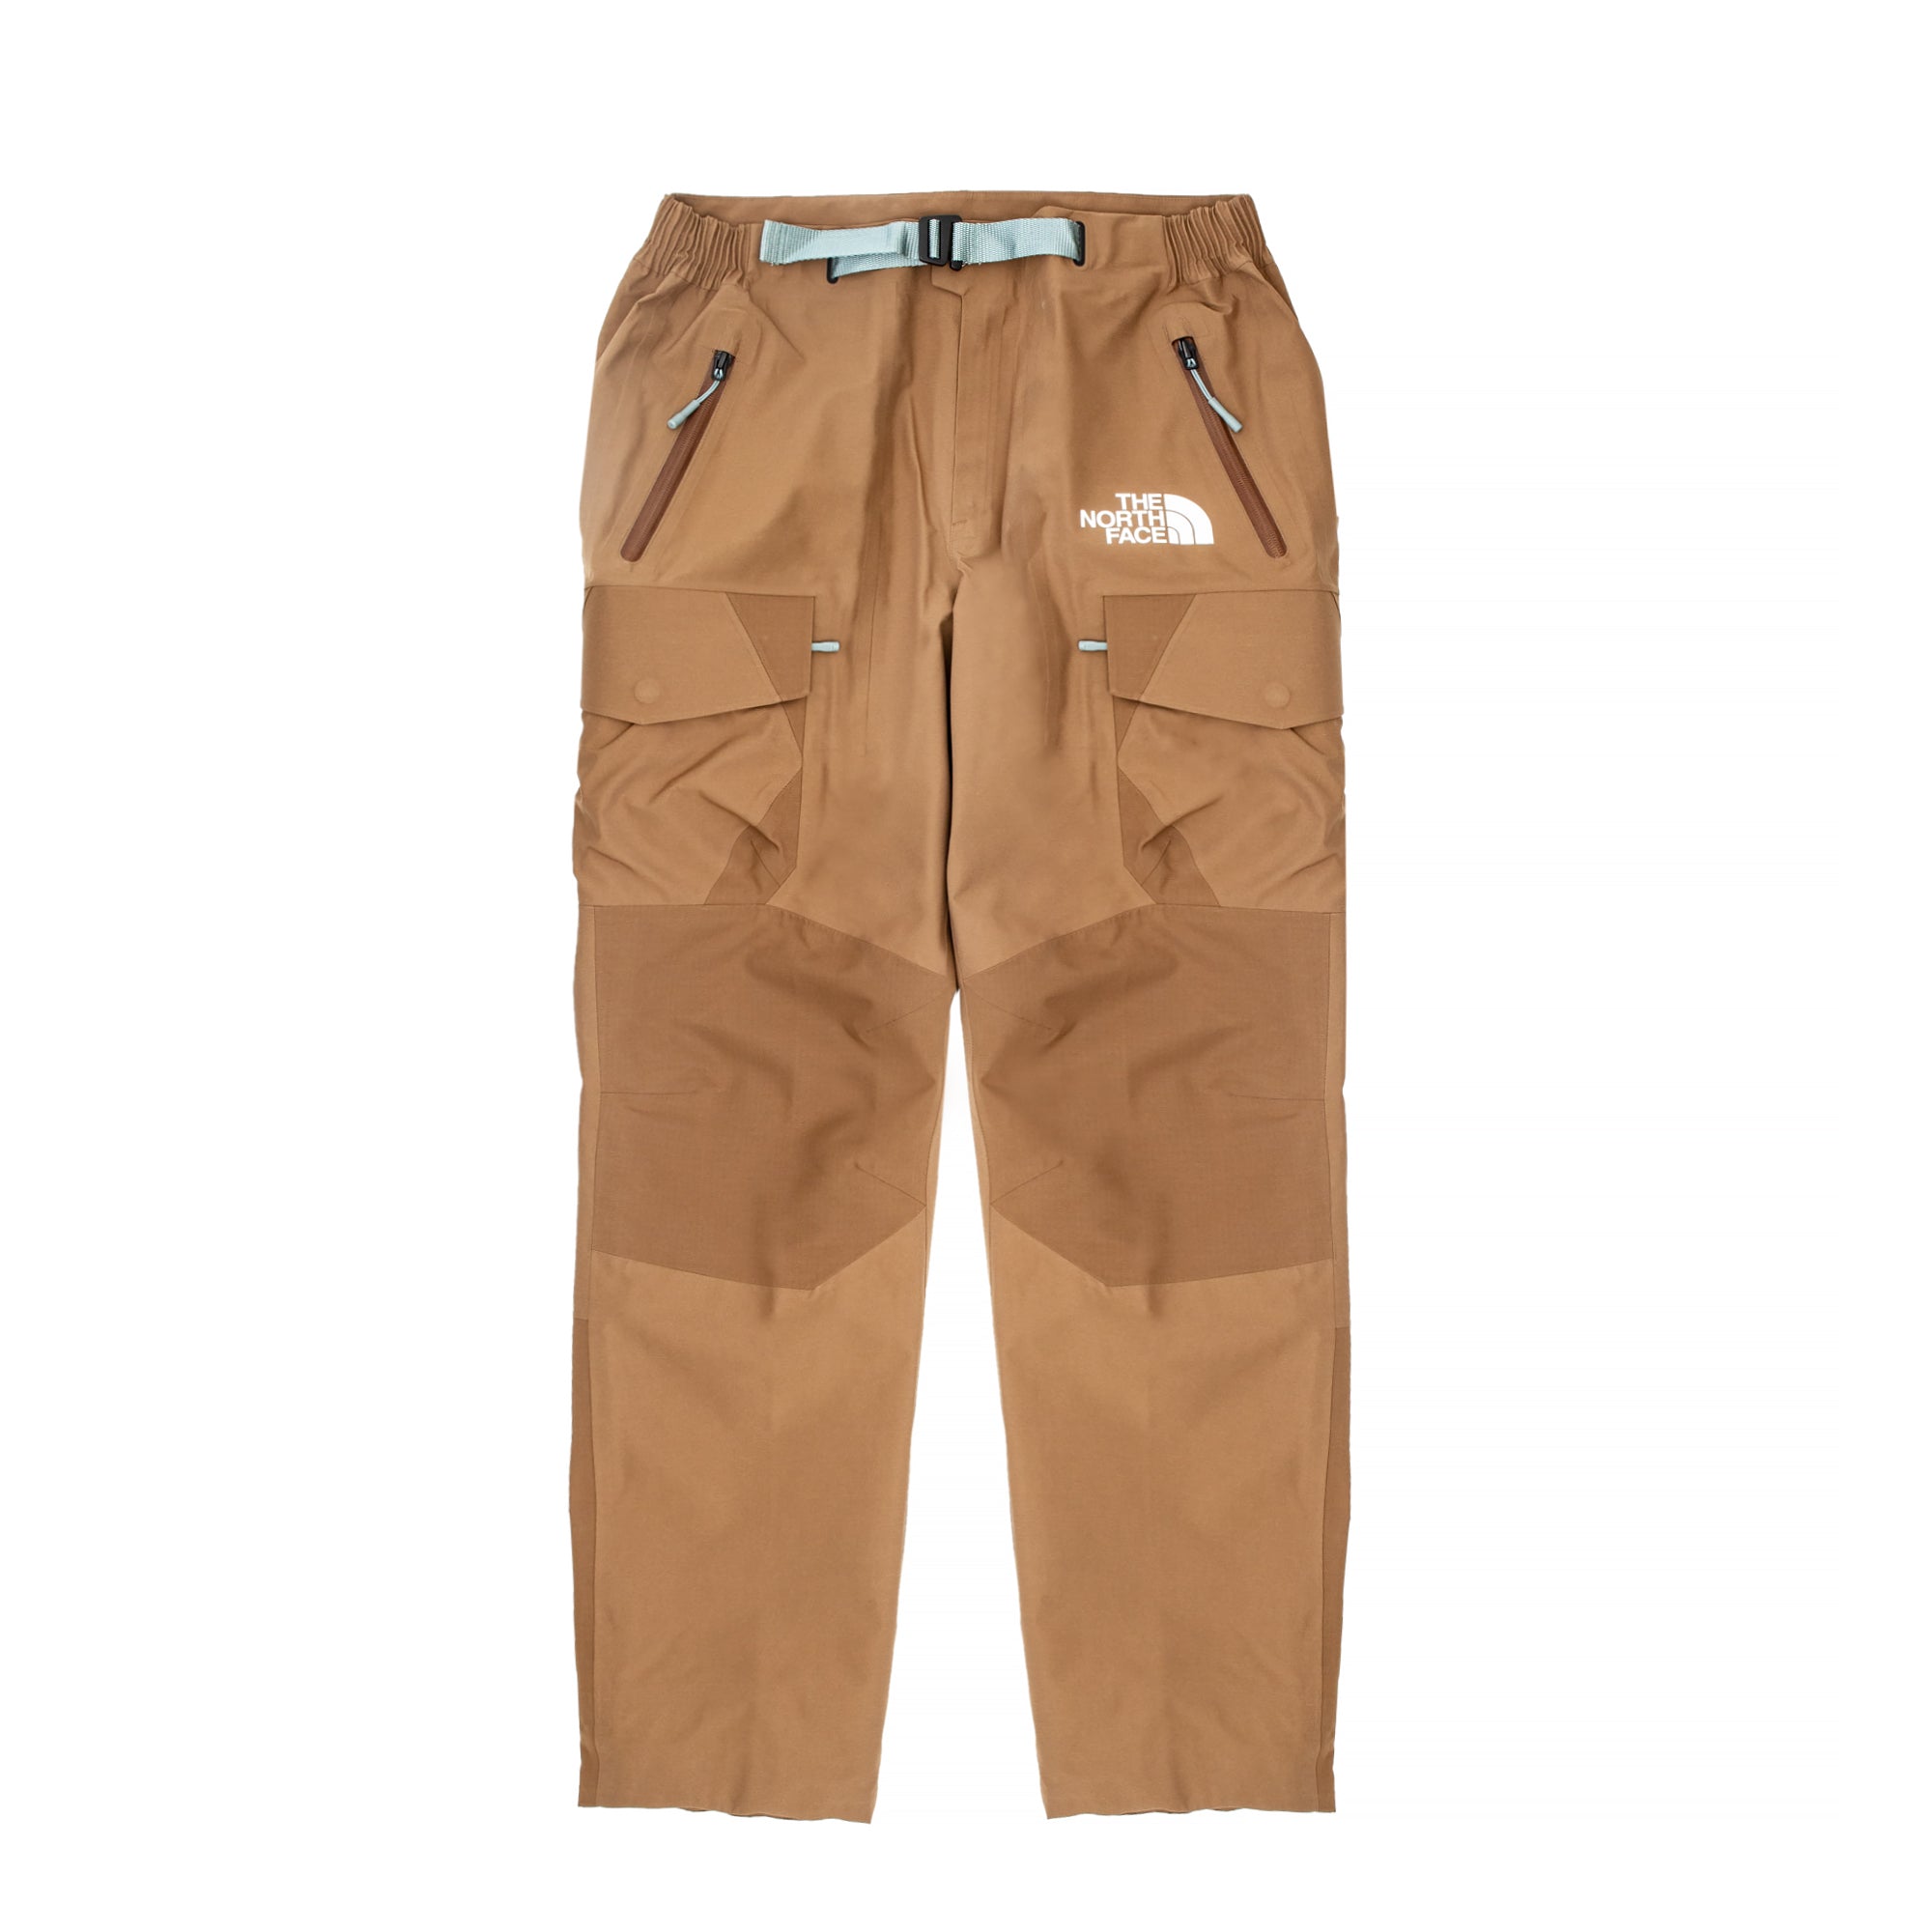 The North Face x Project U Mens Geodesic Shell Pants